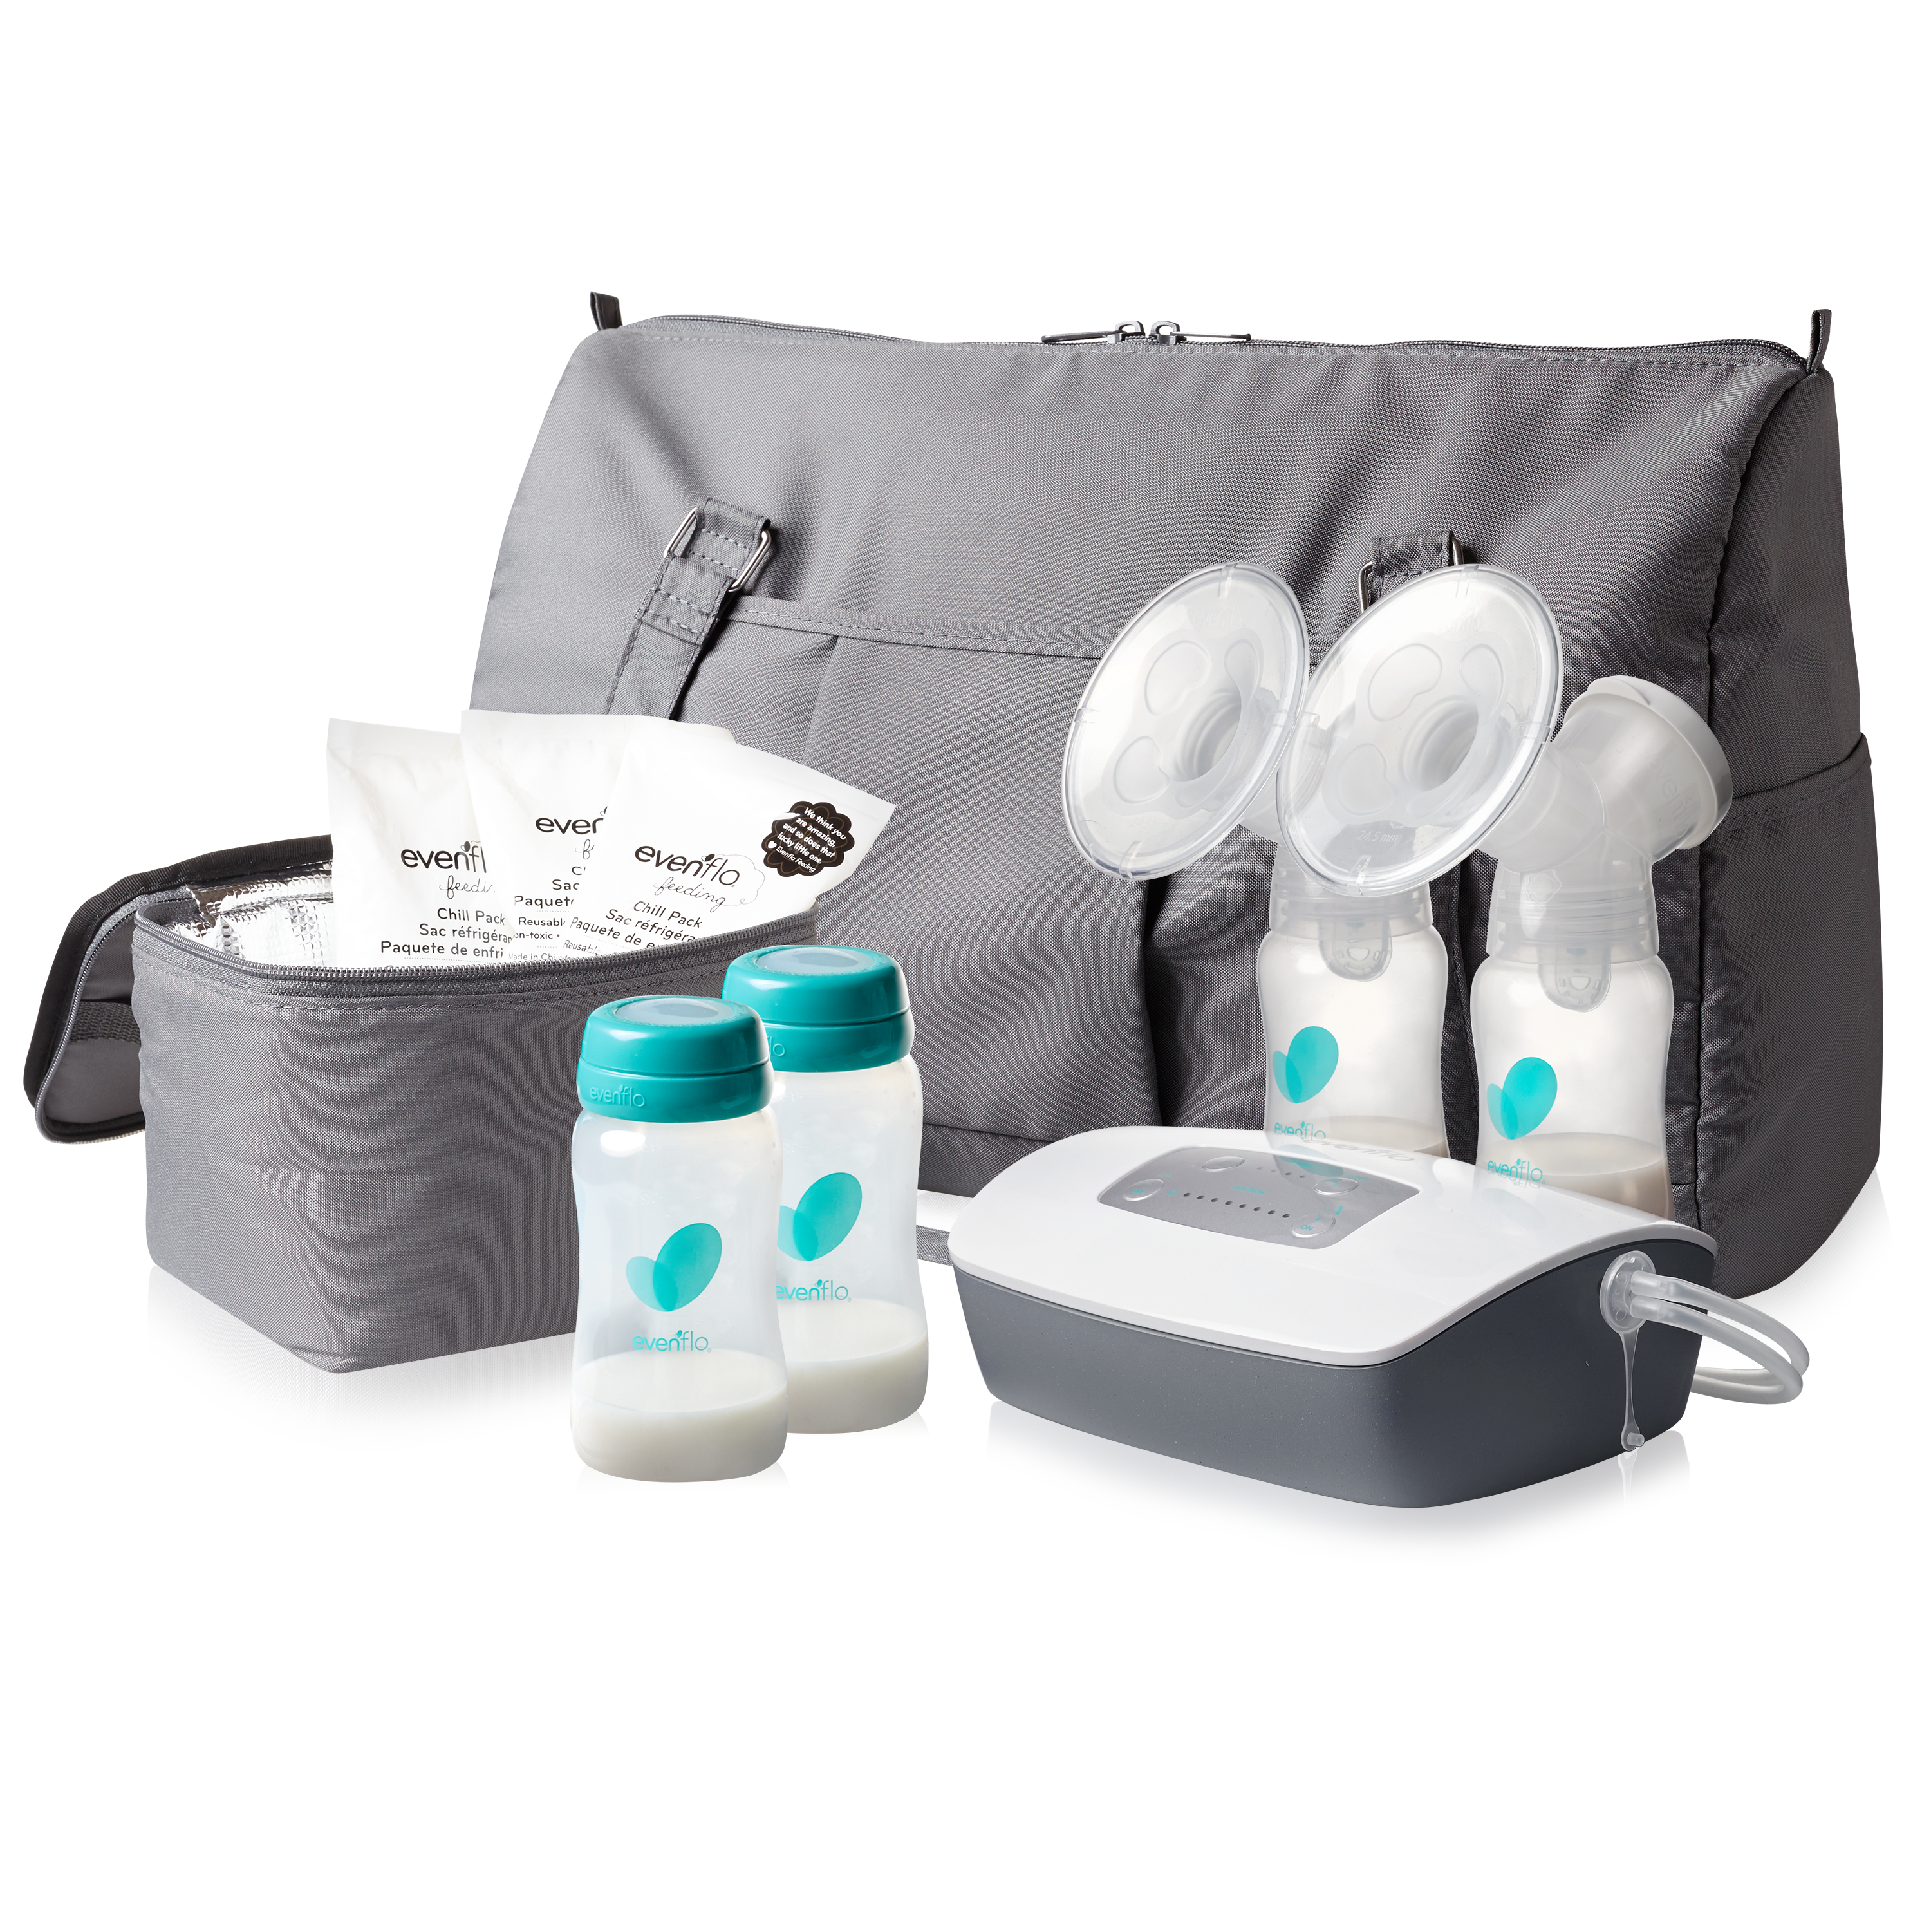 Free Worldwide Shipping 🤱 Evenflo Breast Pumps & Breastfeeding Accessories  – Evenflo Feeding, breastfeeding supplies 